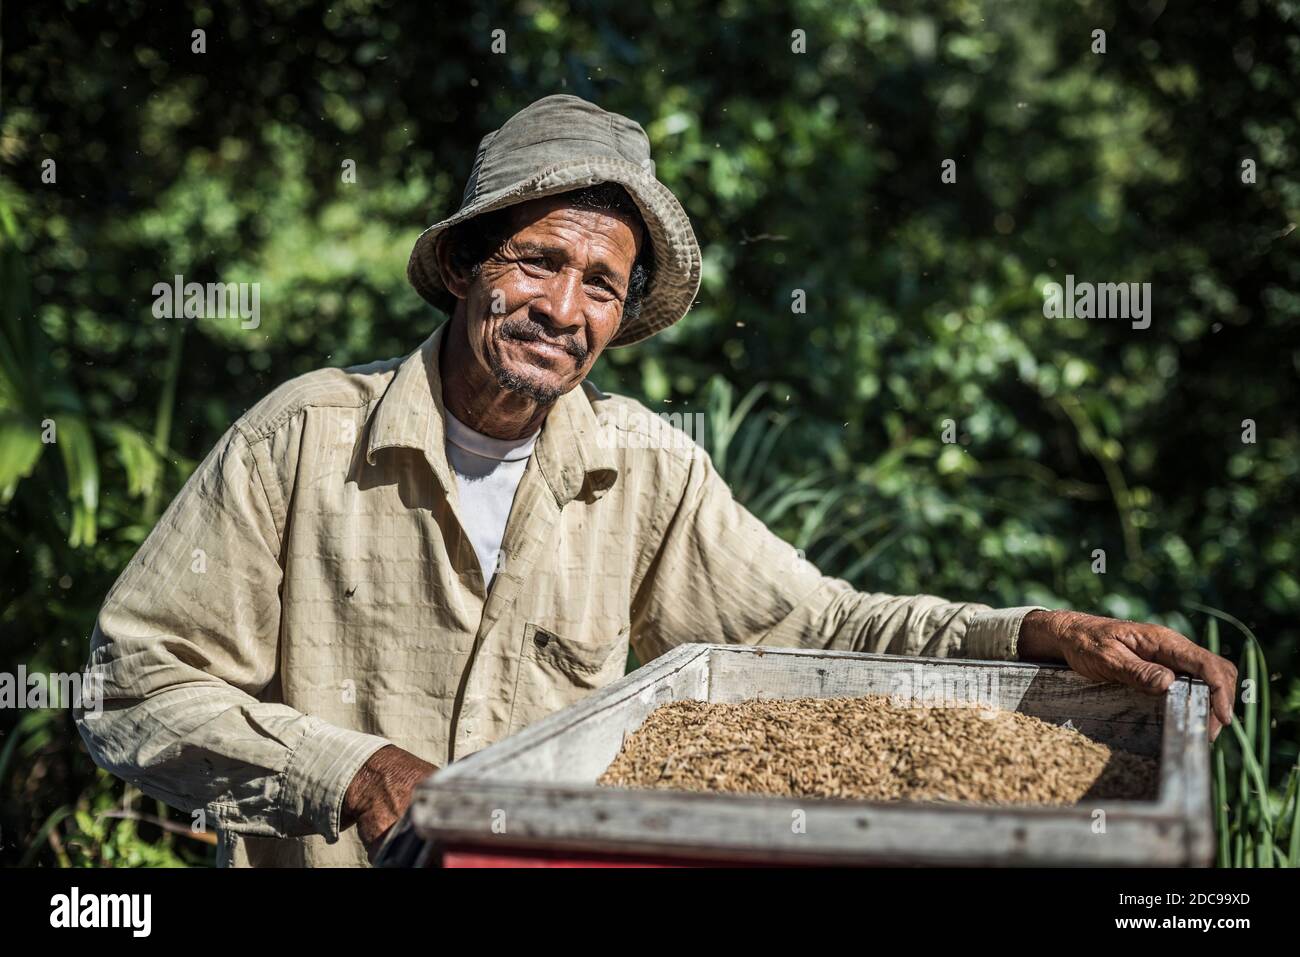 Portrait of a man harvesting rice in paddy fields (rice paddies) at Sungai Pinang near Padang in West Sumatra, Indonesia, Asia Stock Photo